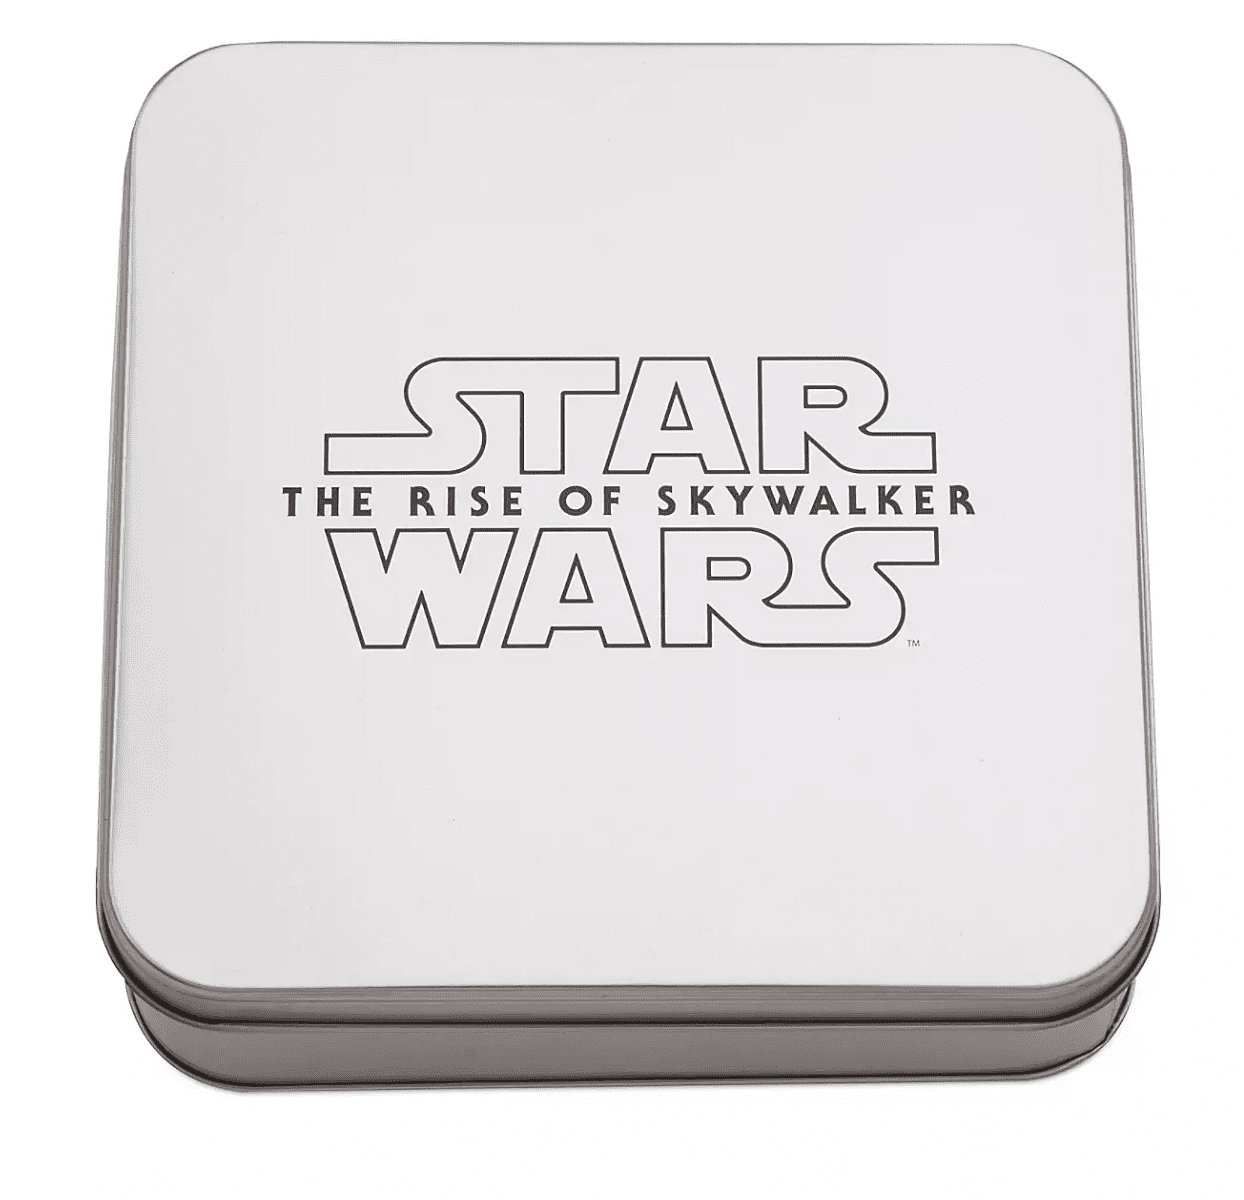 Star Wars The Rise of Skywalker Limited Edition LE 3200 Disney Pin Collector Tin